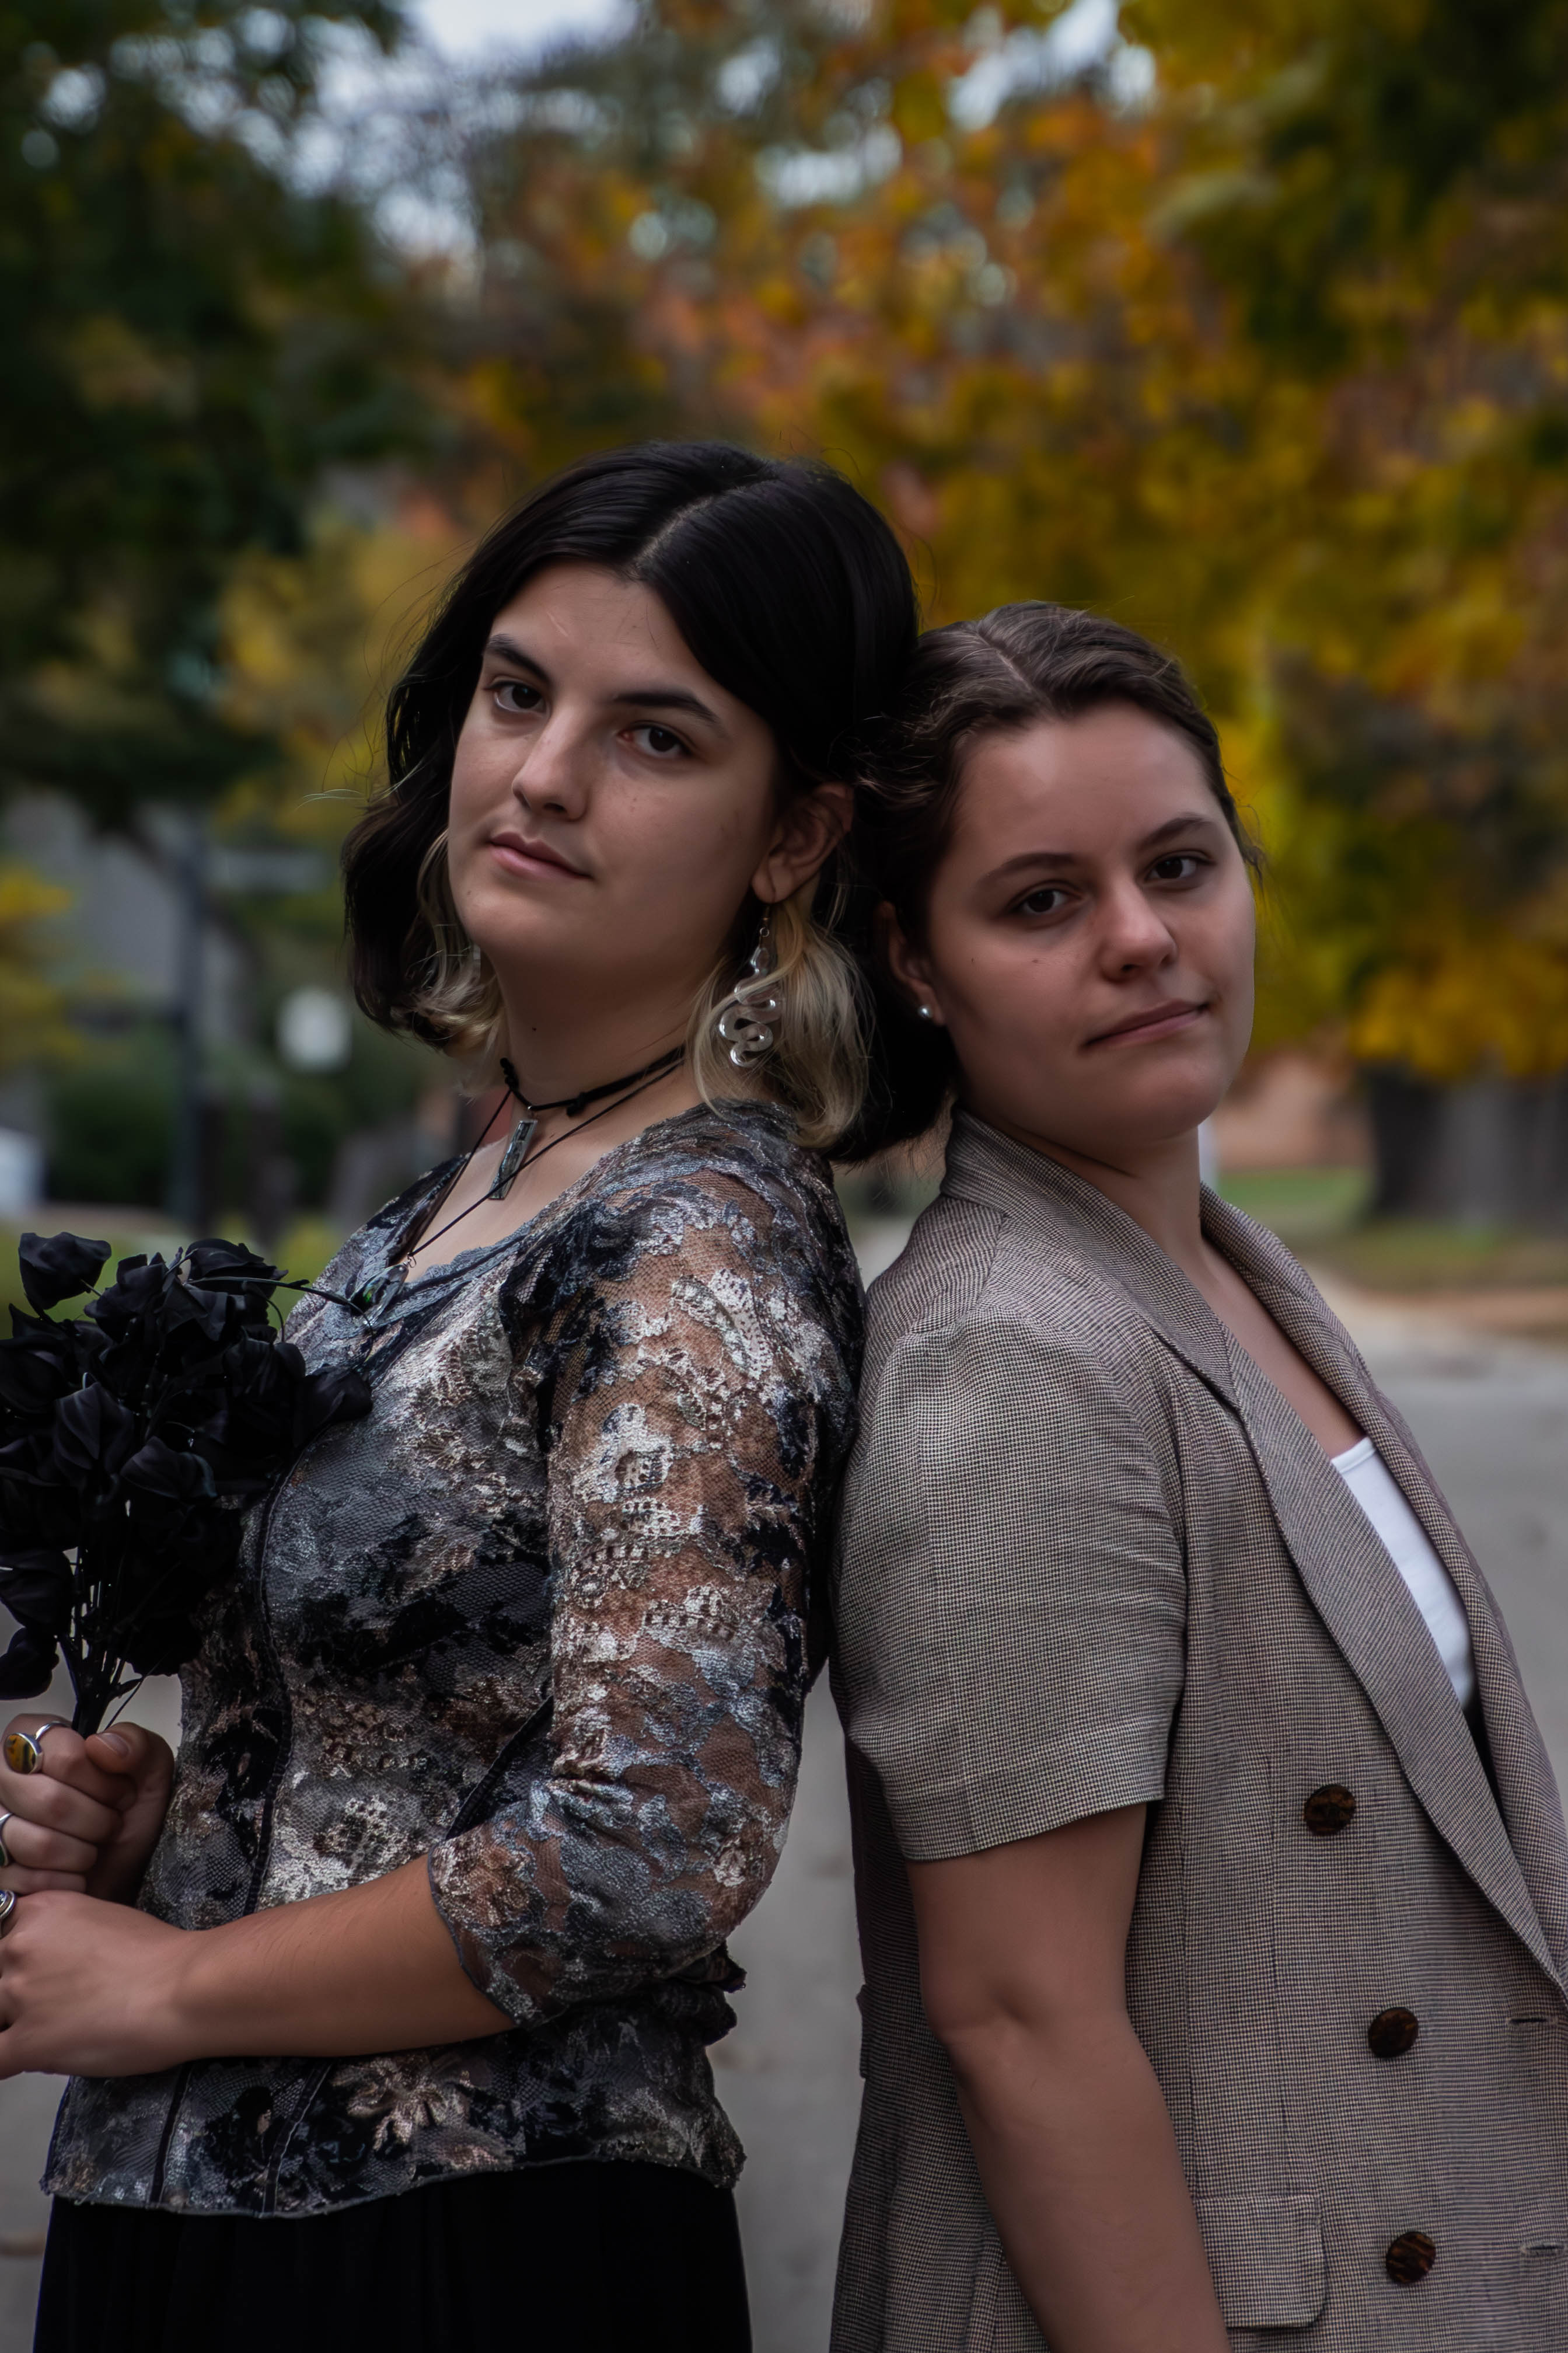 Caroline Leibowitz '24 and Isabel Pereira-Lopez '24 are working on separate research projects focused on the historical past and present of witchcraft. (photo by Tess Willett)